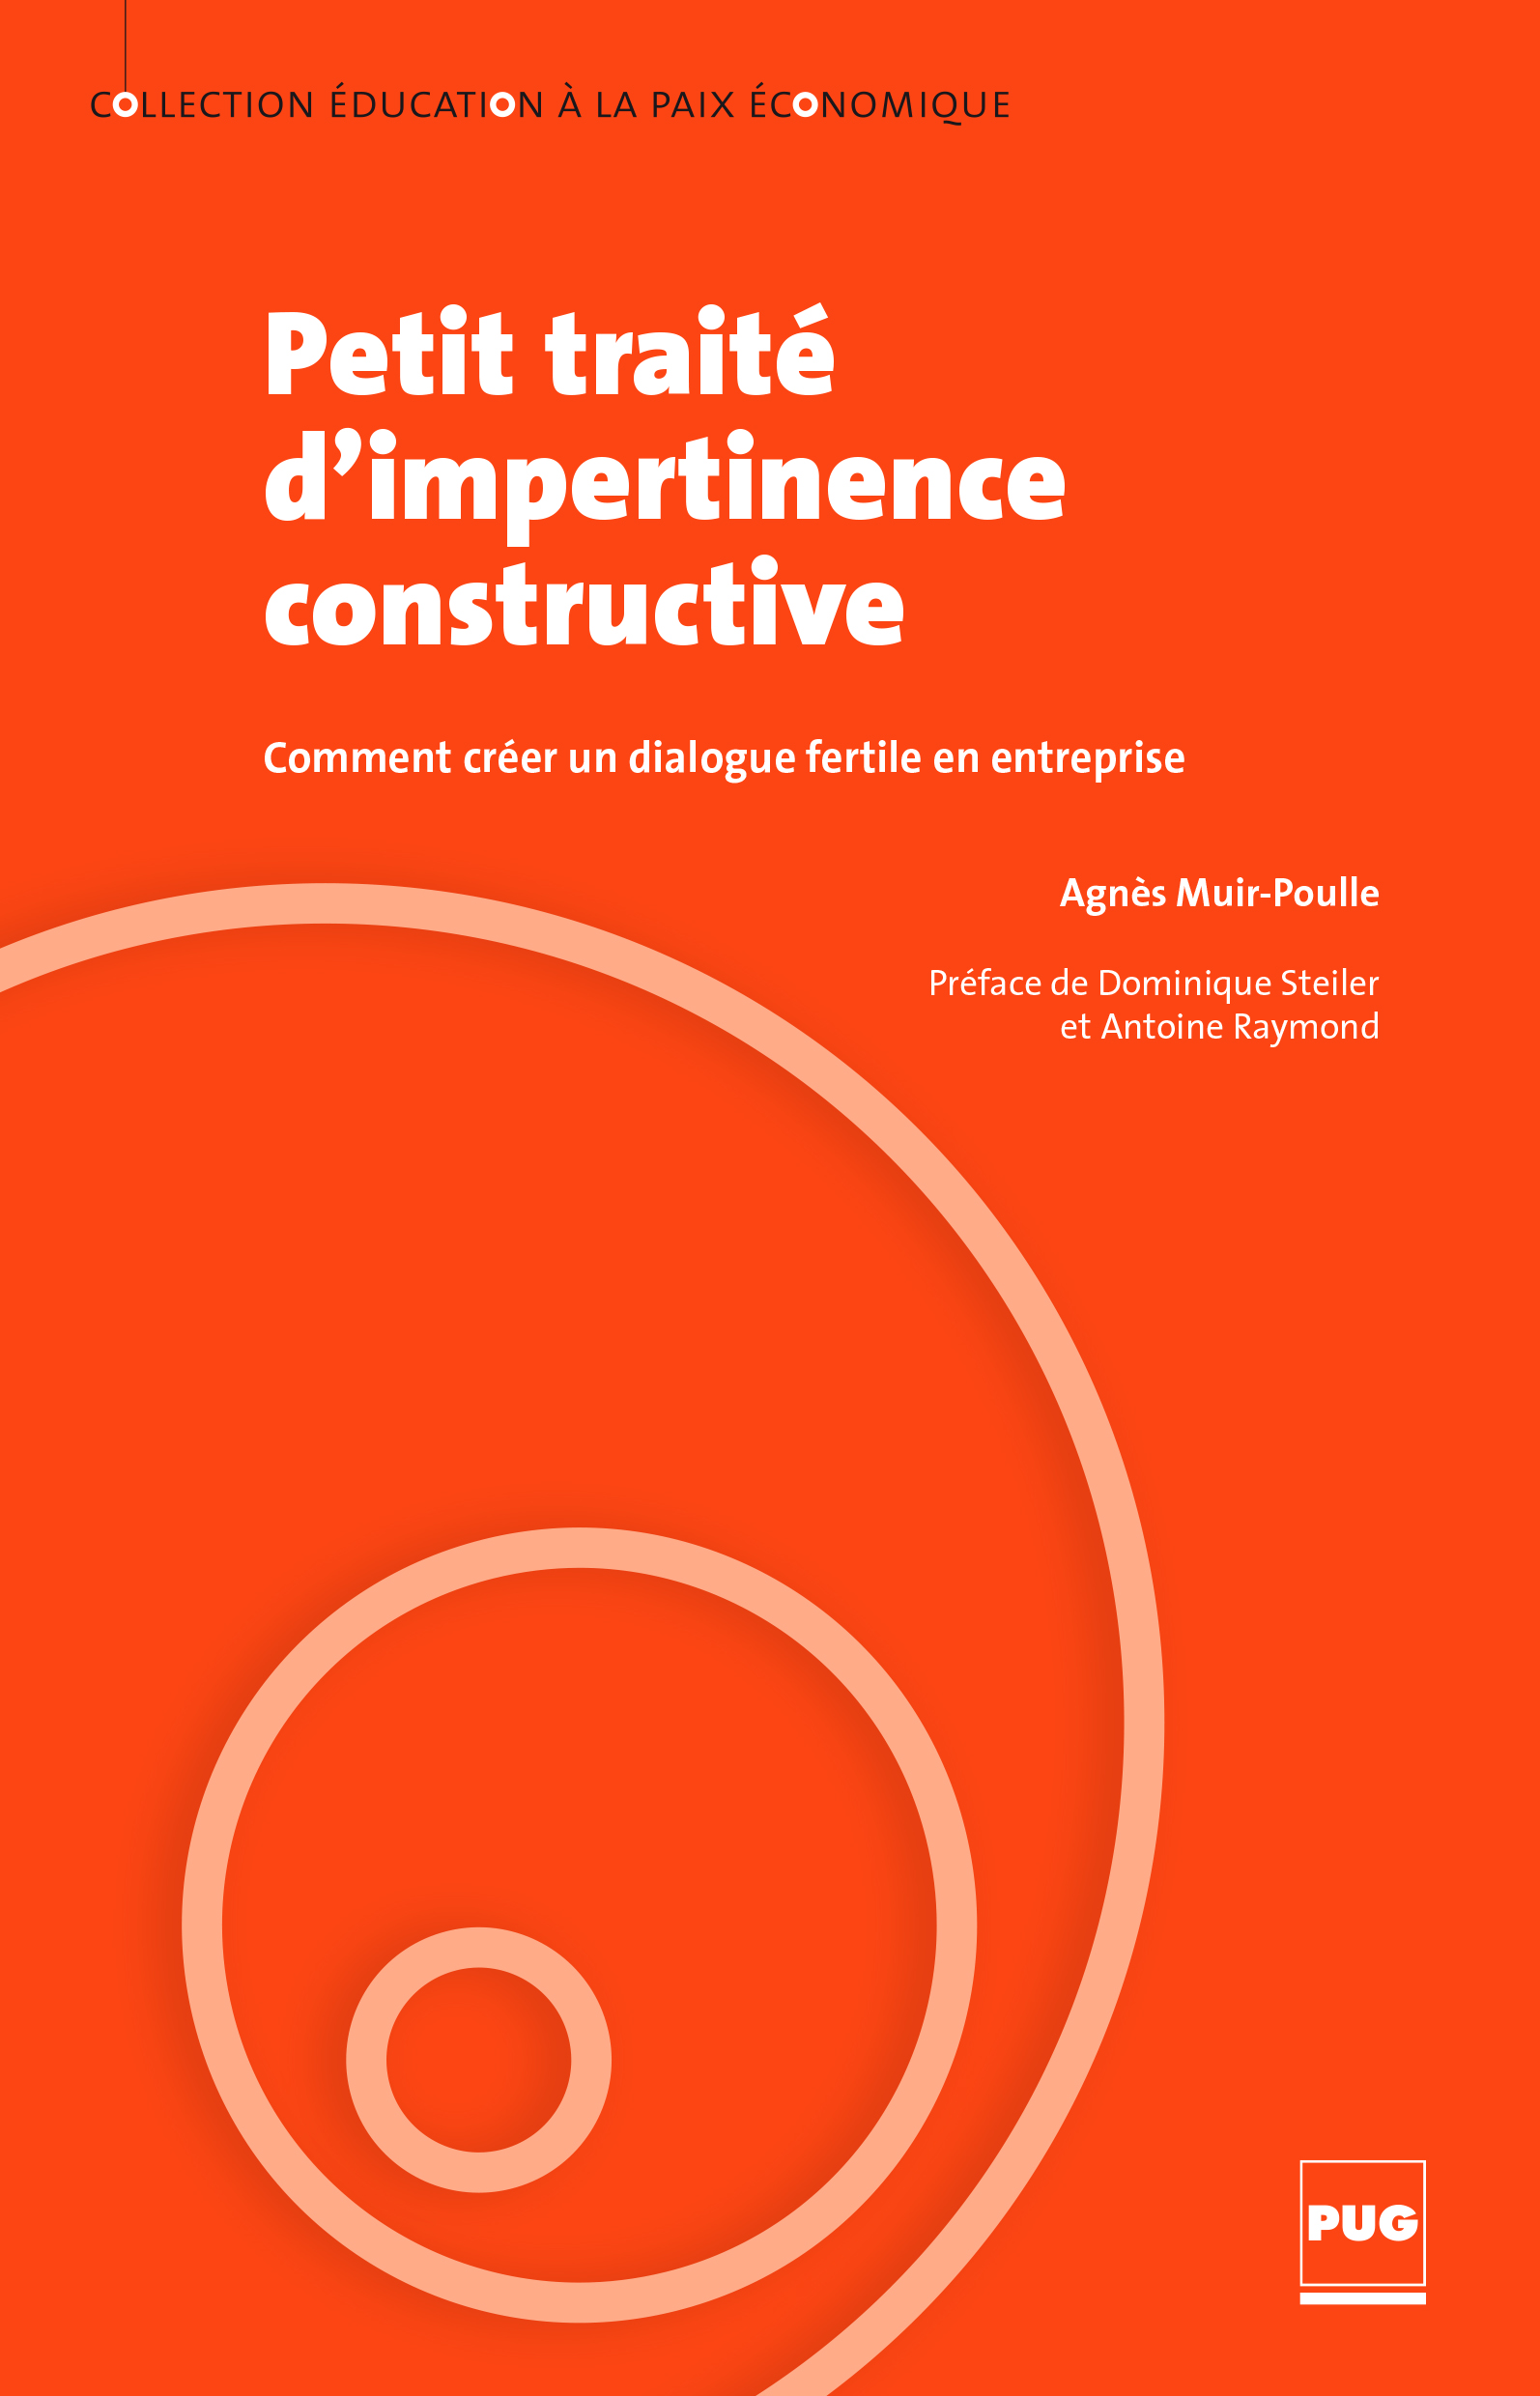 Impertinence constructive